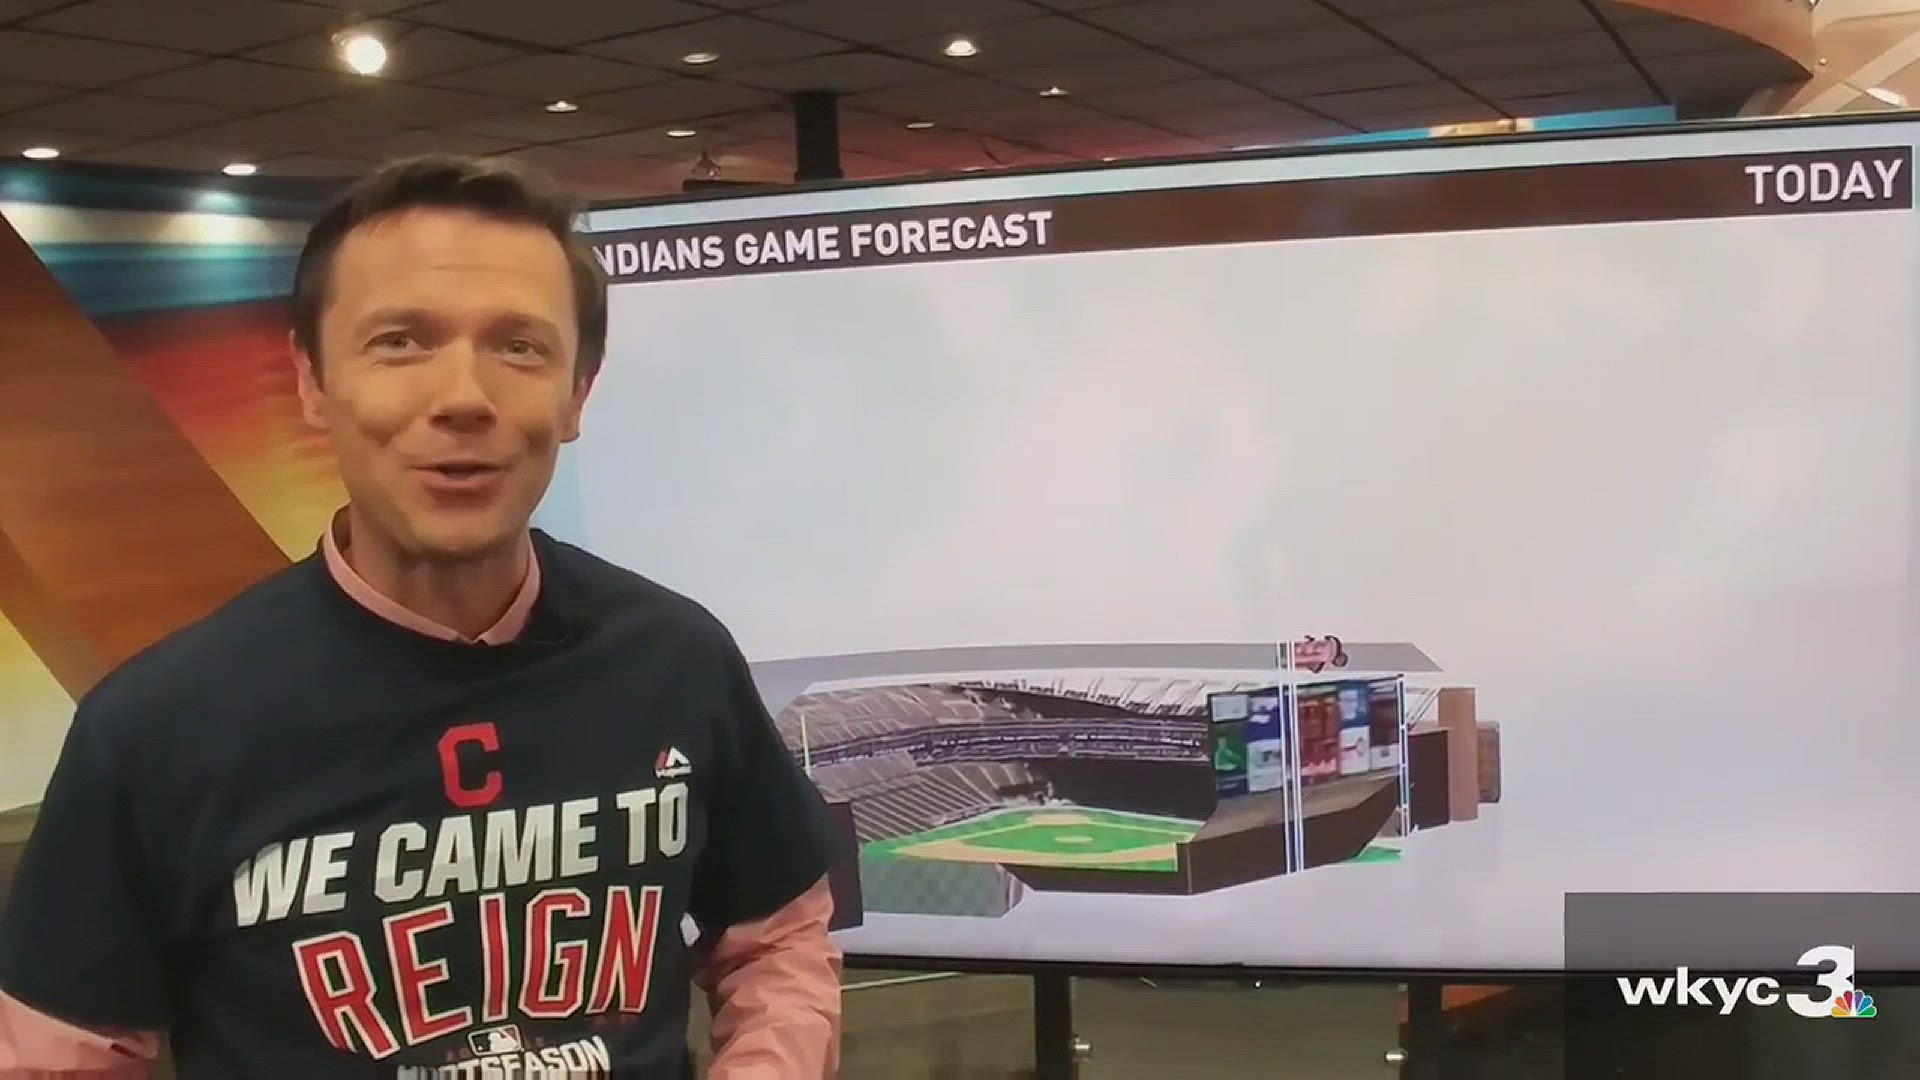 Oct. 6, 2016: Greg Dee takes a look at the weather outlook for the first postseason Indians game as the Tribe faces the Boston Red Sox.